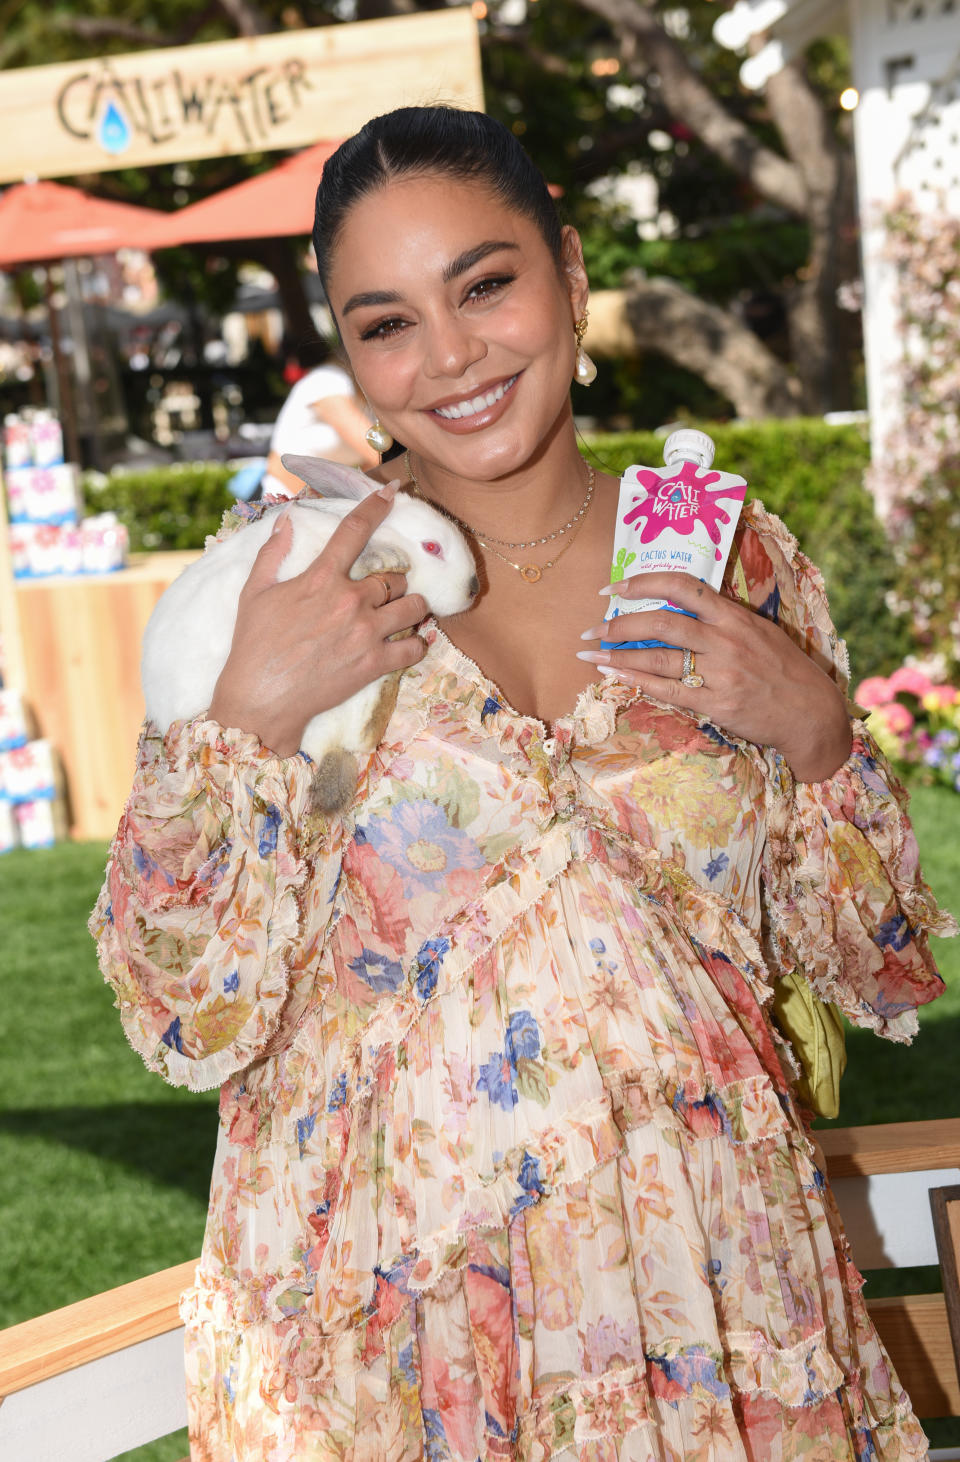 LOS ANGELES, CALIFORNIA - MARCH 16: Vanessa Hudgens celebrates Caliwater Kids Launch at The Grove on March 16, 2024 in Los Angeles, California. (Photo by Vivien Killilea/Getty Images for Caliwater Kids )